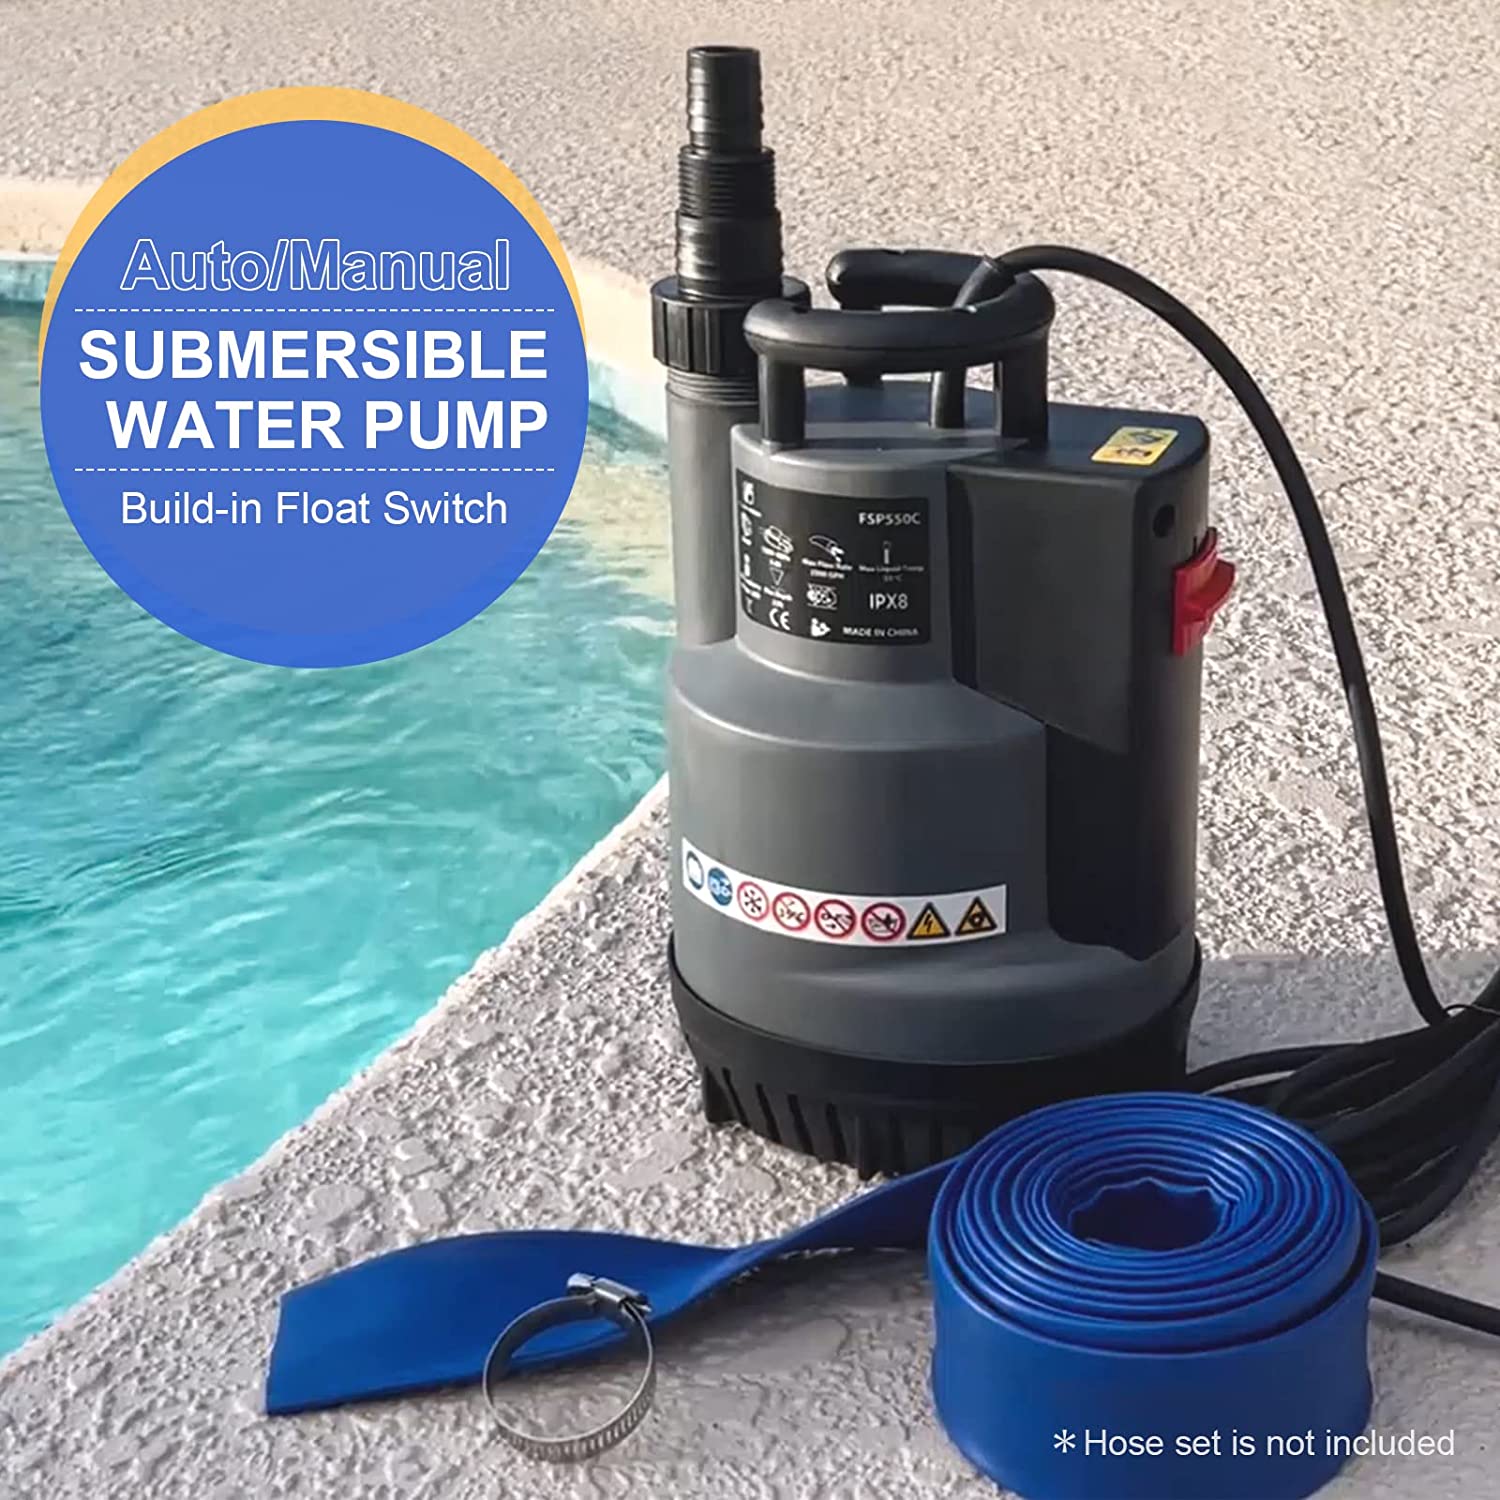 Switchable / Variable water pump: All you need to know